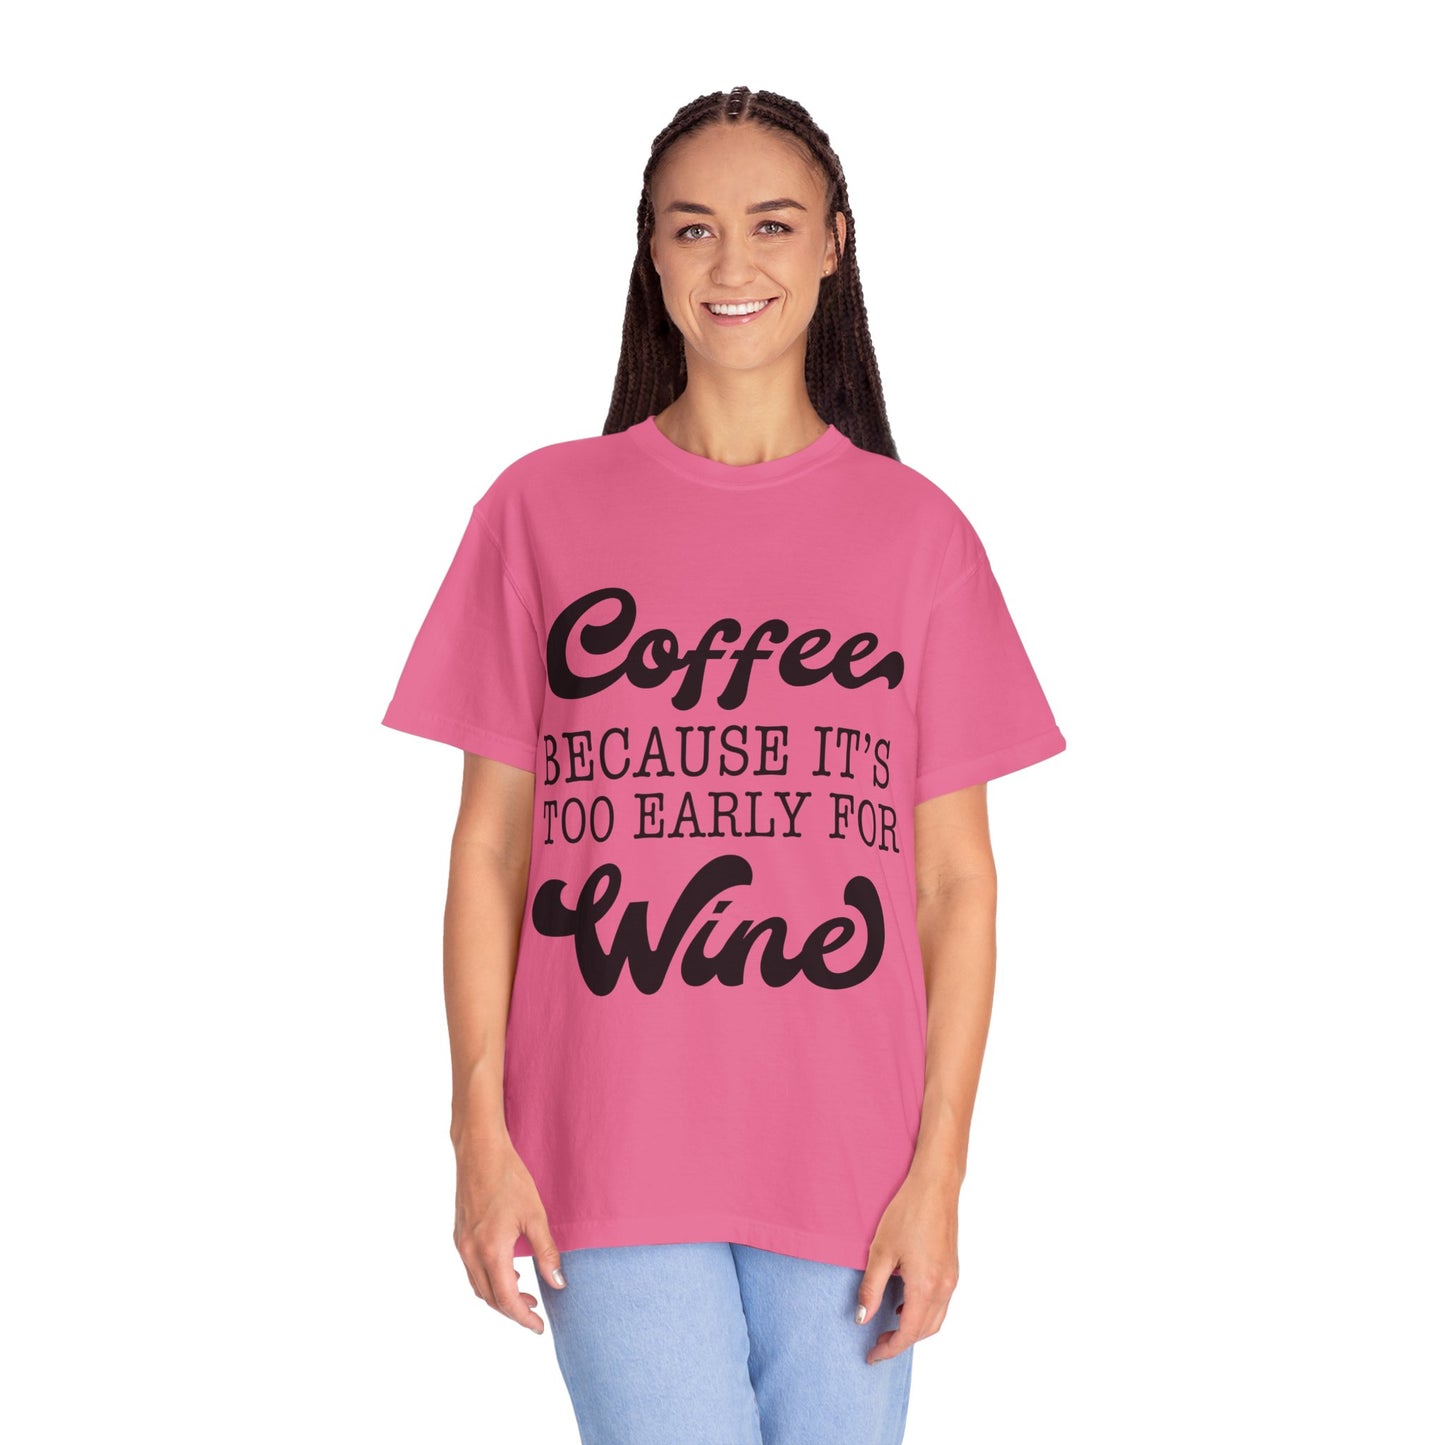 Coffee because too early for wine - Unisex Garment-Dyed T-shirt